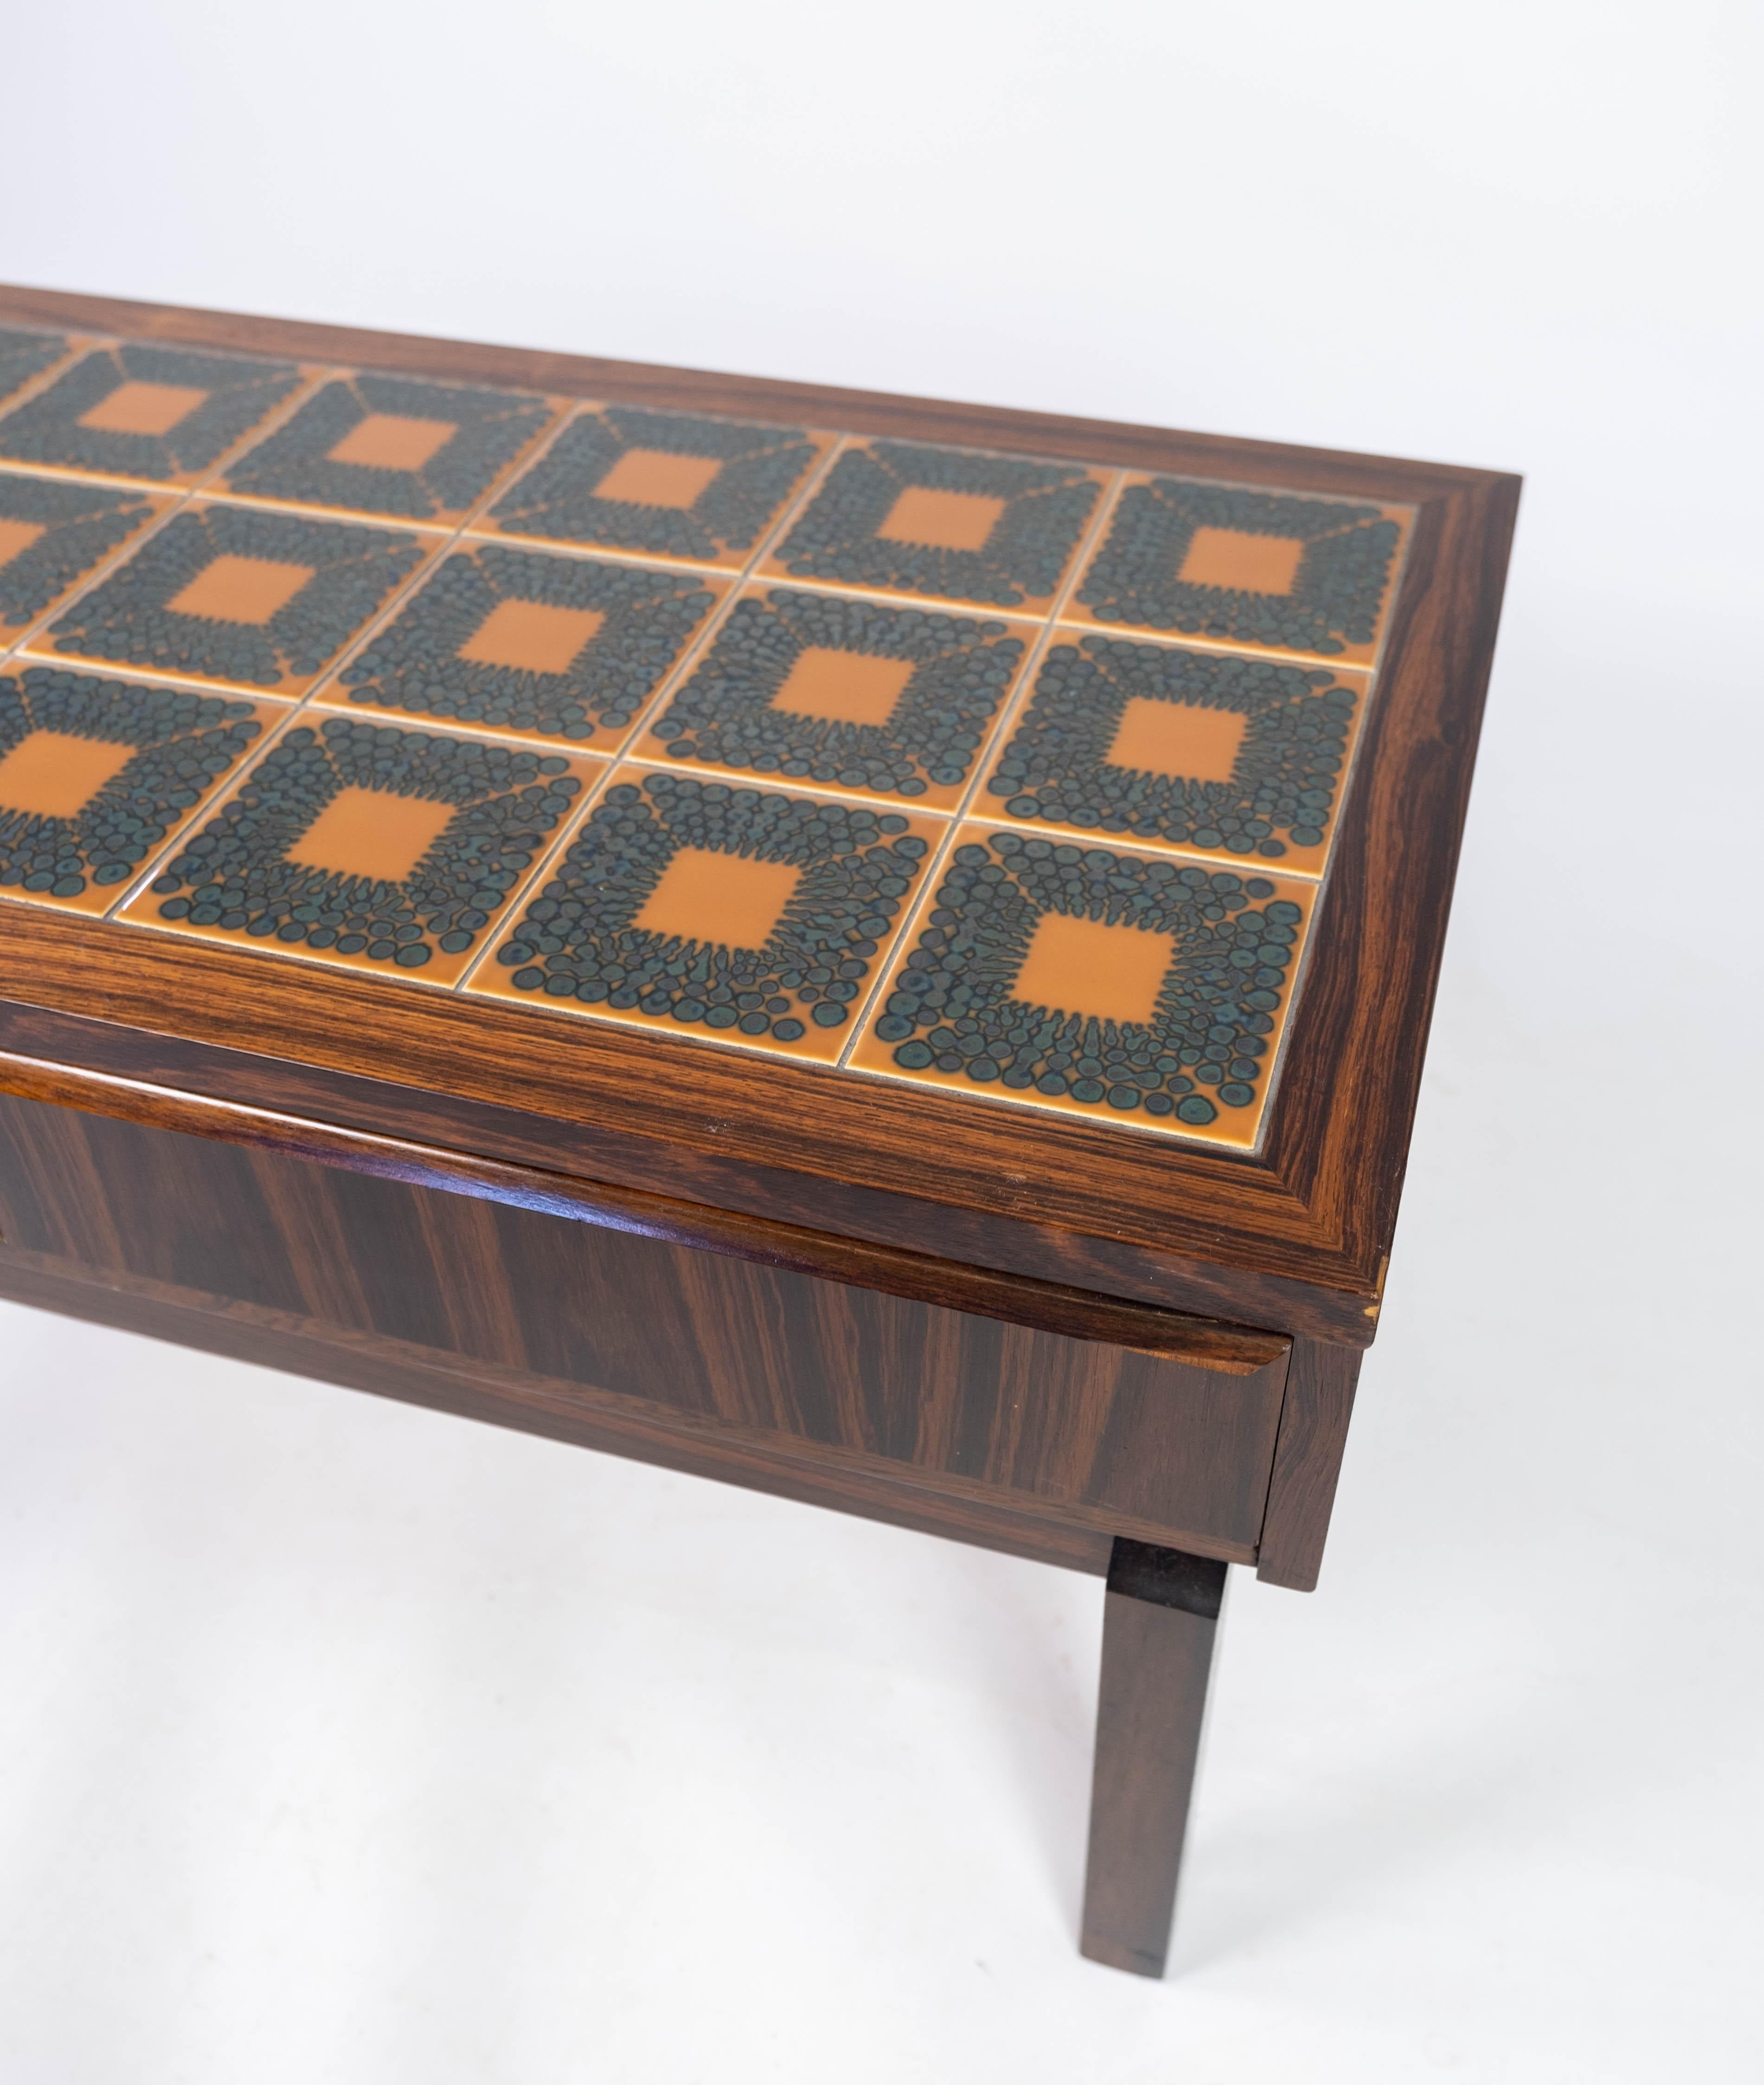 Low Chest in Rosewood and Tiles, of Danish Design from the 1960s For Sale 1